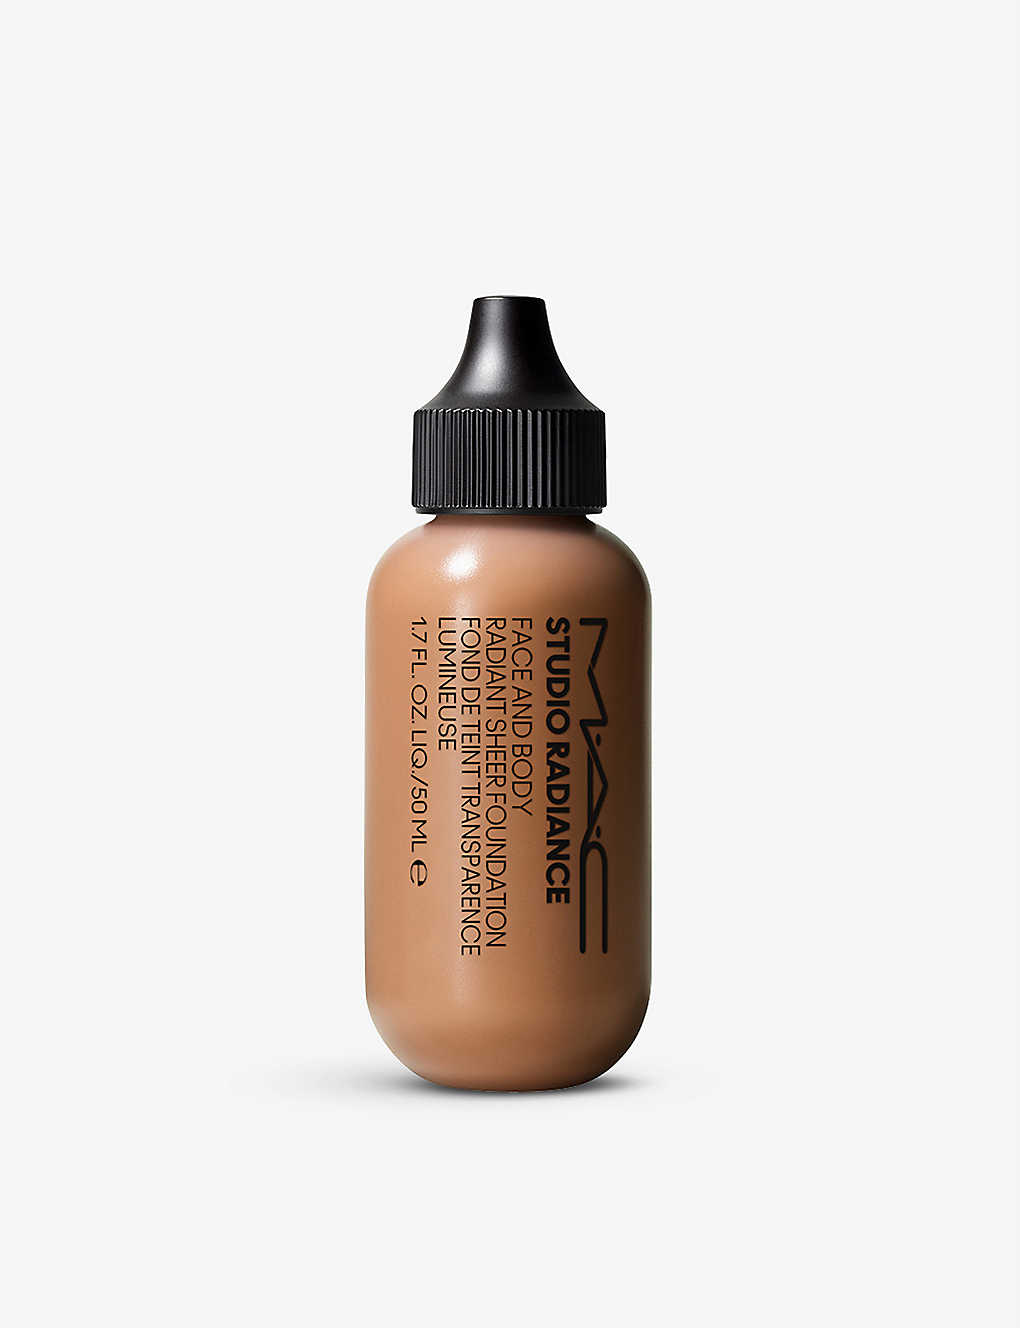 Mac Studio Radiance Face And Body Radiant Sheer Foundation 50ml In C4